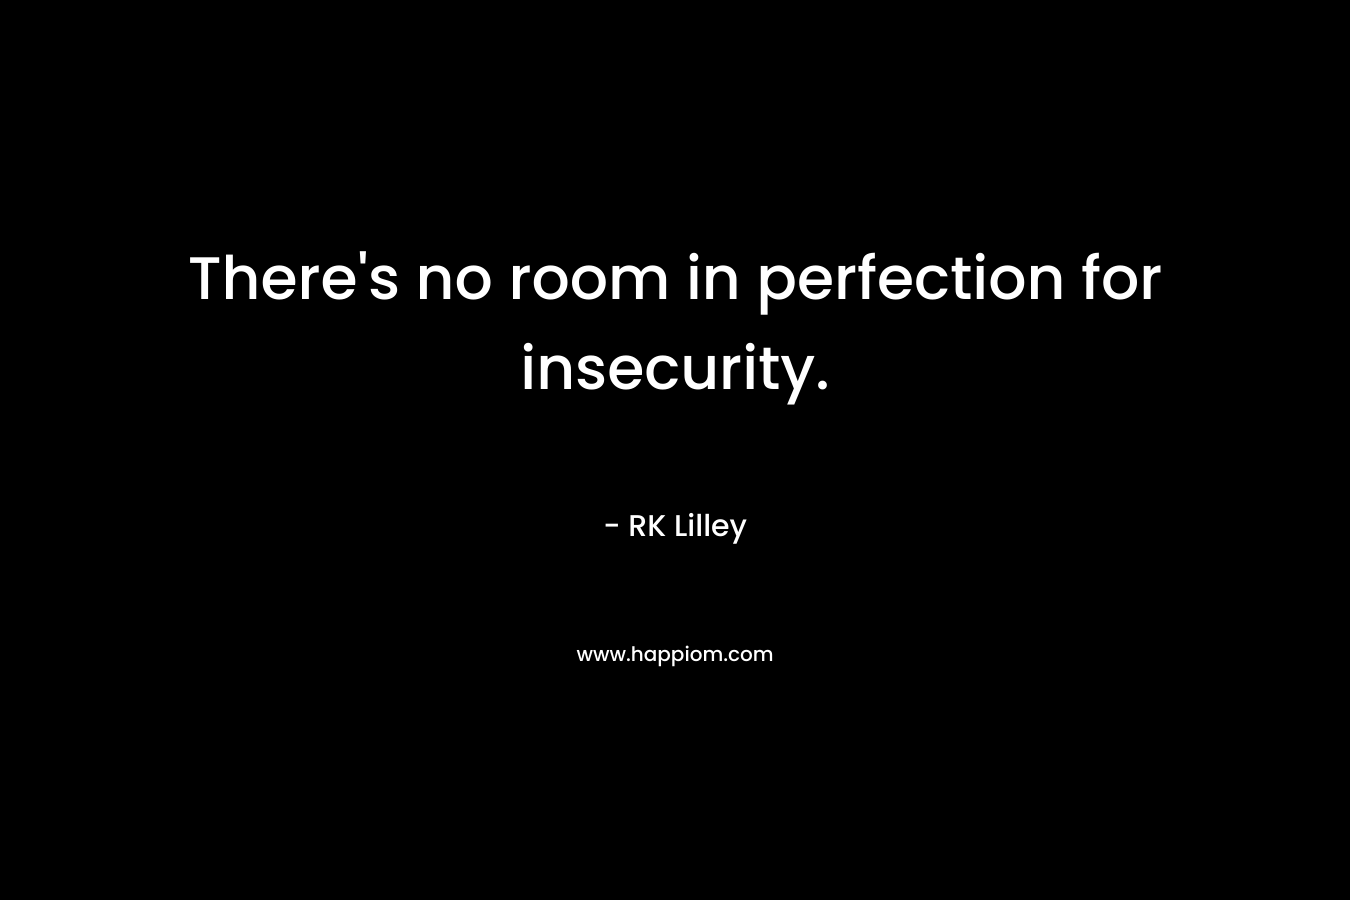 There’s no room in perfection for insecurity. – RK Lilley